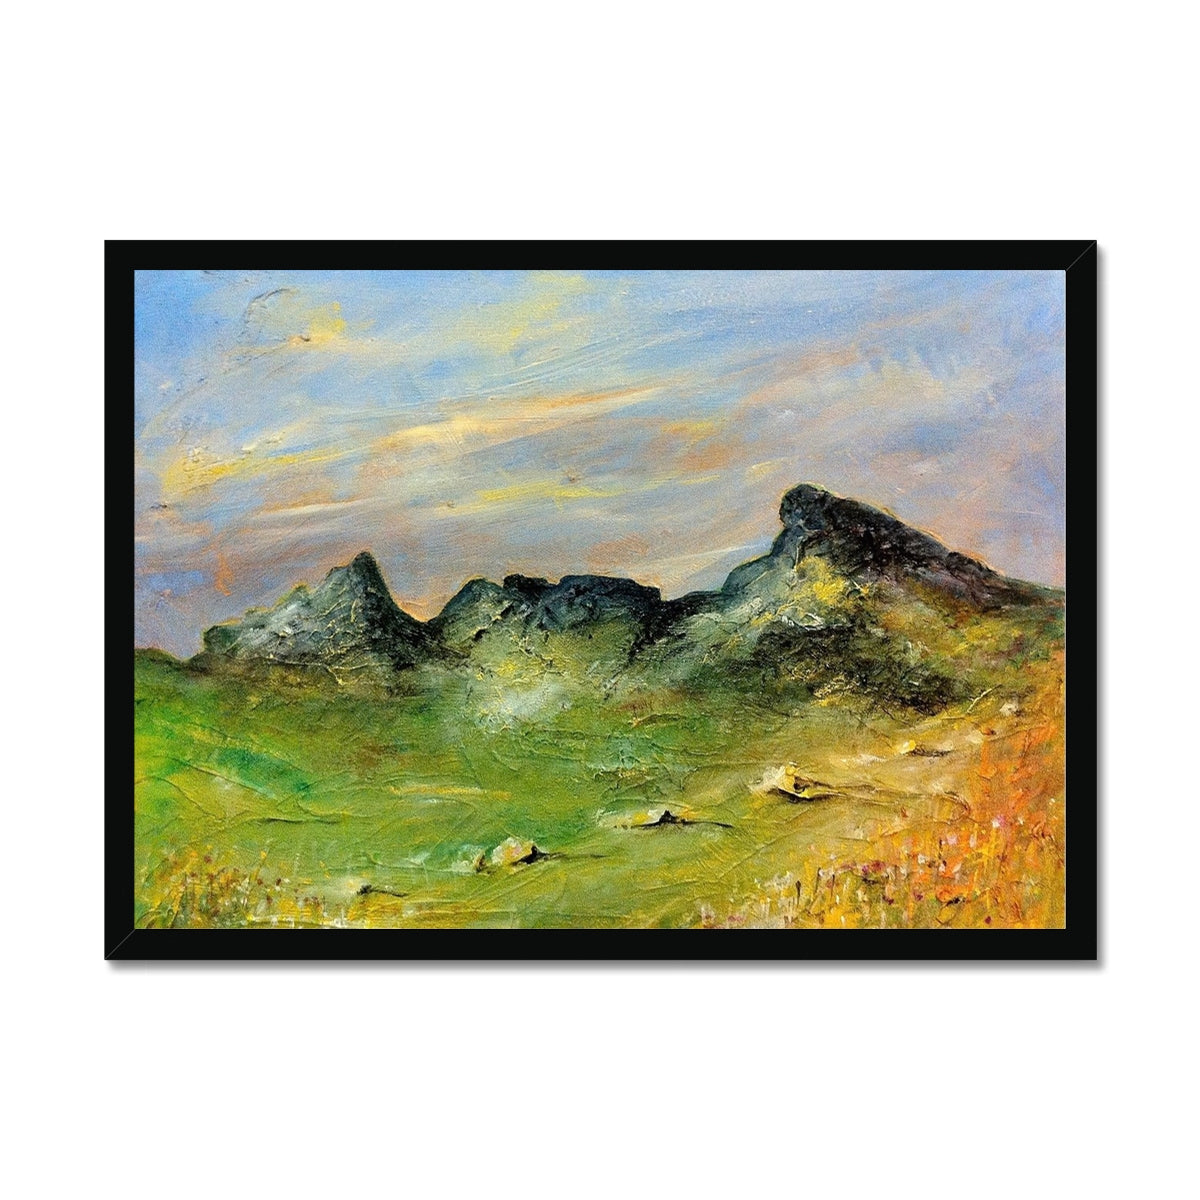 The Cobbler Painting | Framed Prints From Scotland-Framed Prints-Scottish Lochs & Mountains Art Gallery-A2 Landscape-Black Frame-Paintings, Prints, Homeware, Art Gifts From Scotland By Scottish Artist Kevin Hunter